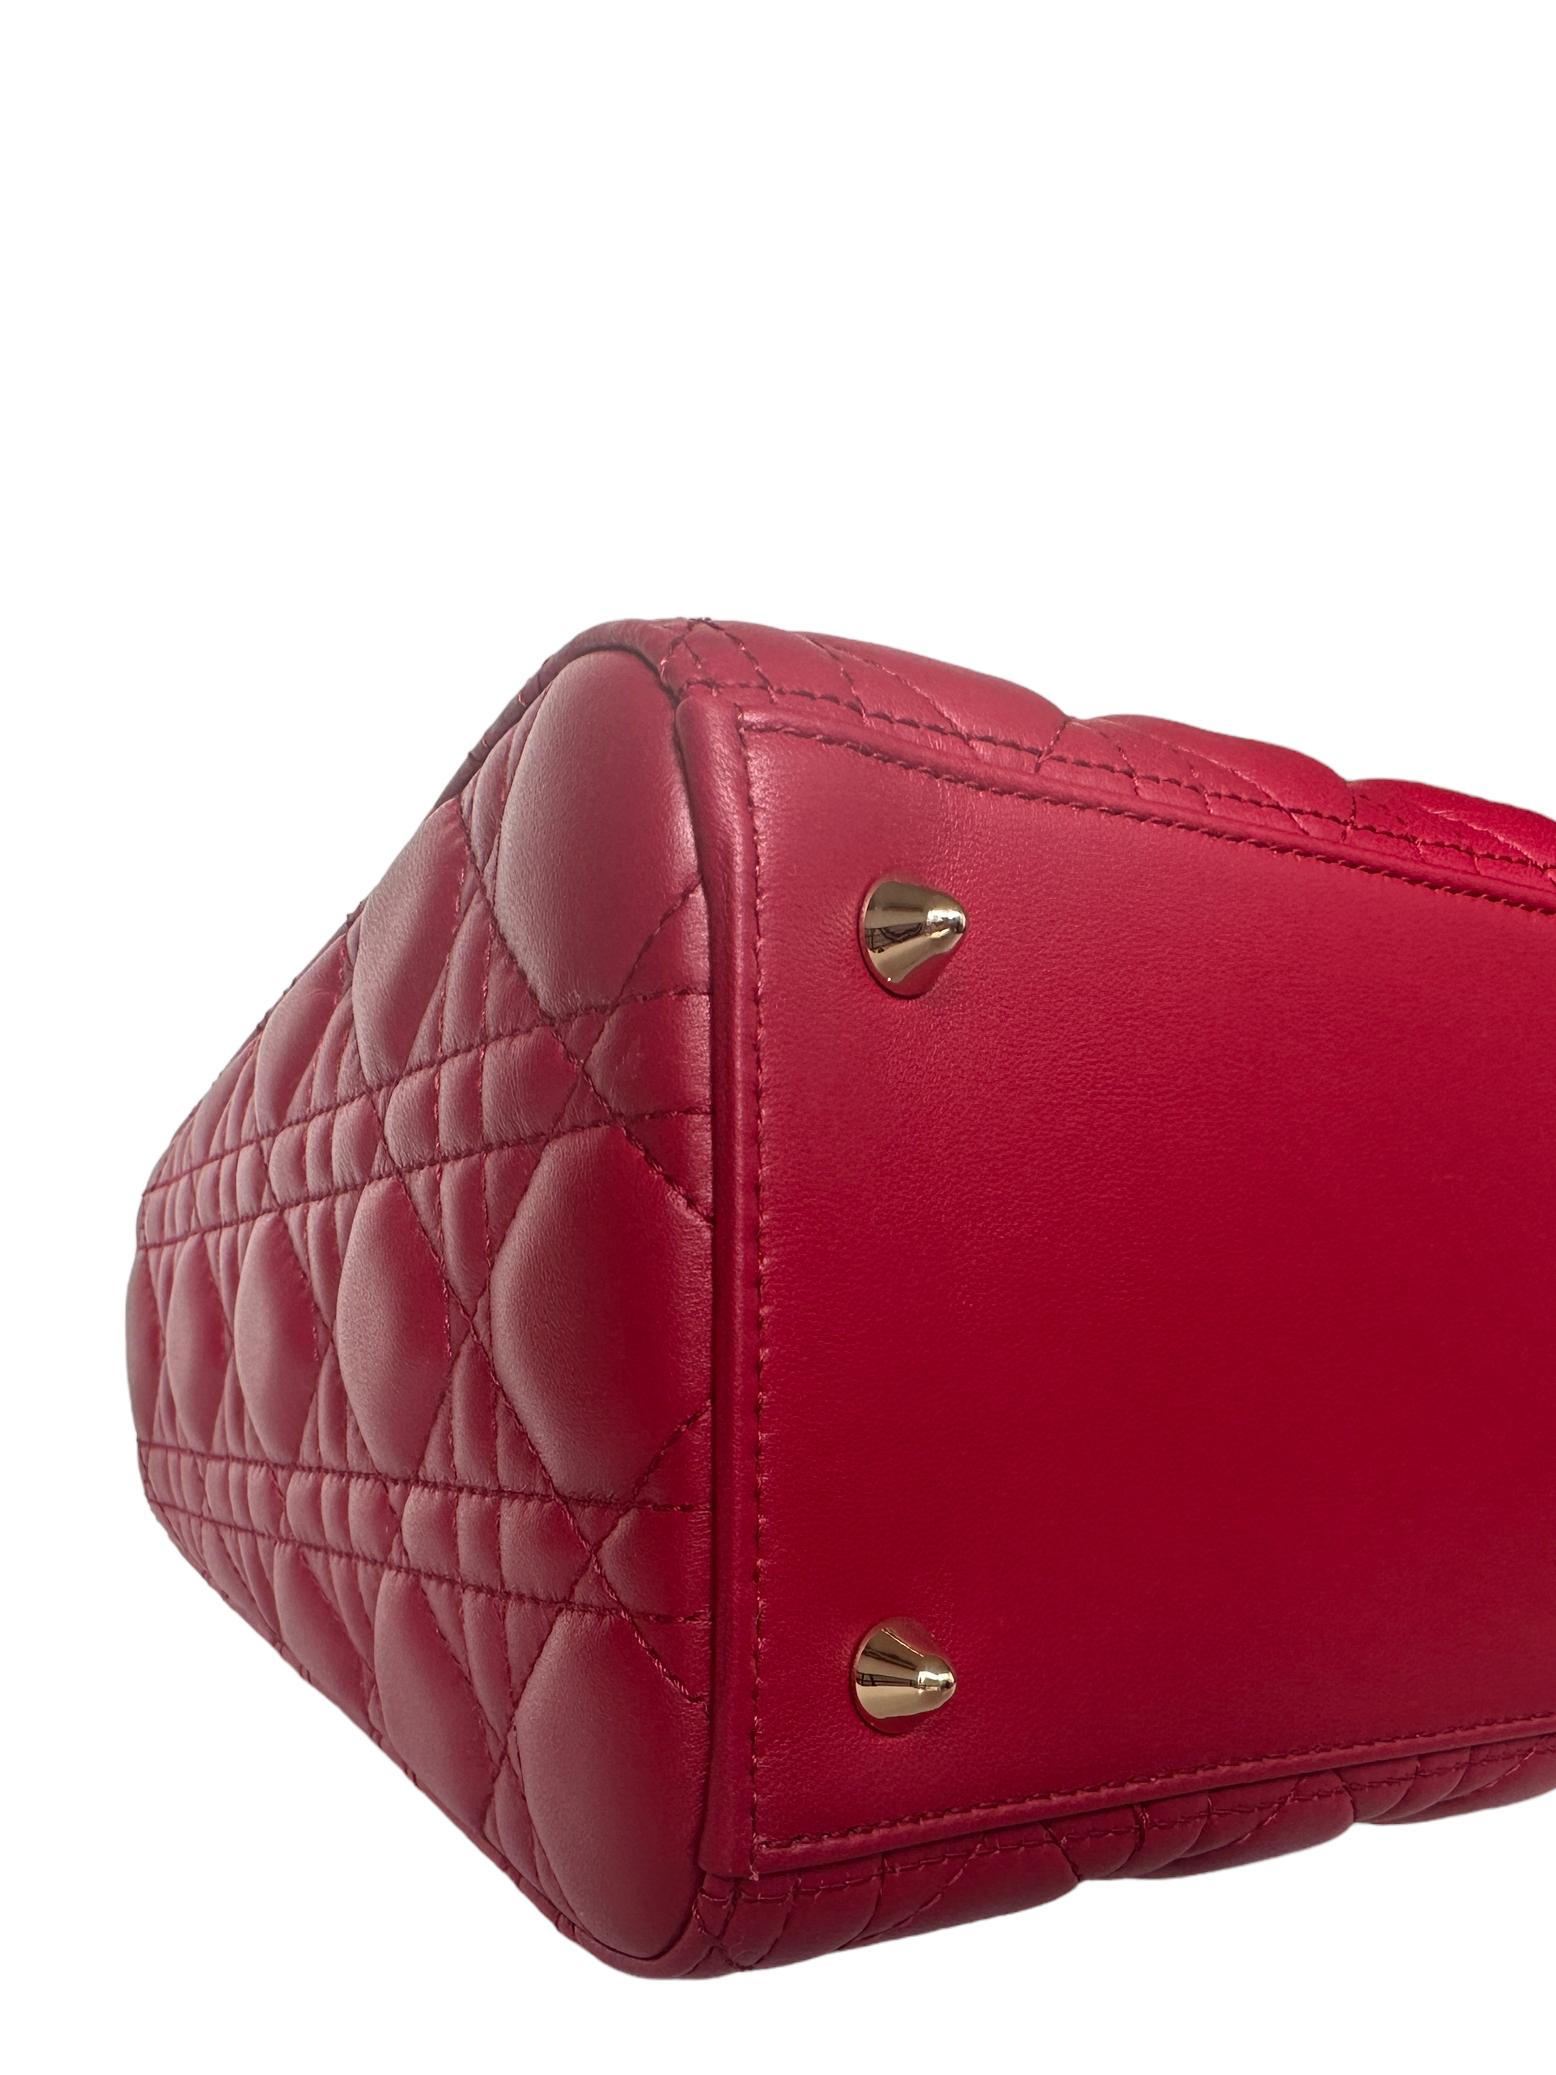 Christian Dior Red Leather Cannage Quilted Medium Lady Dior Bag 1